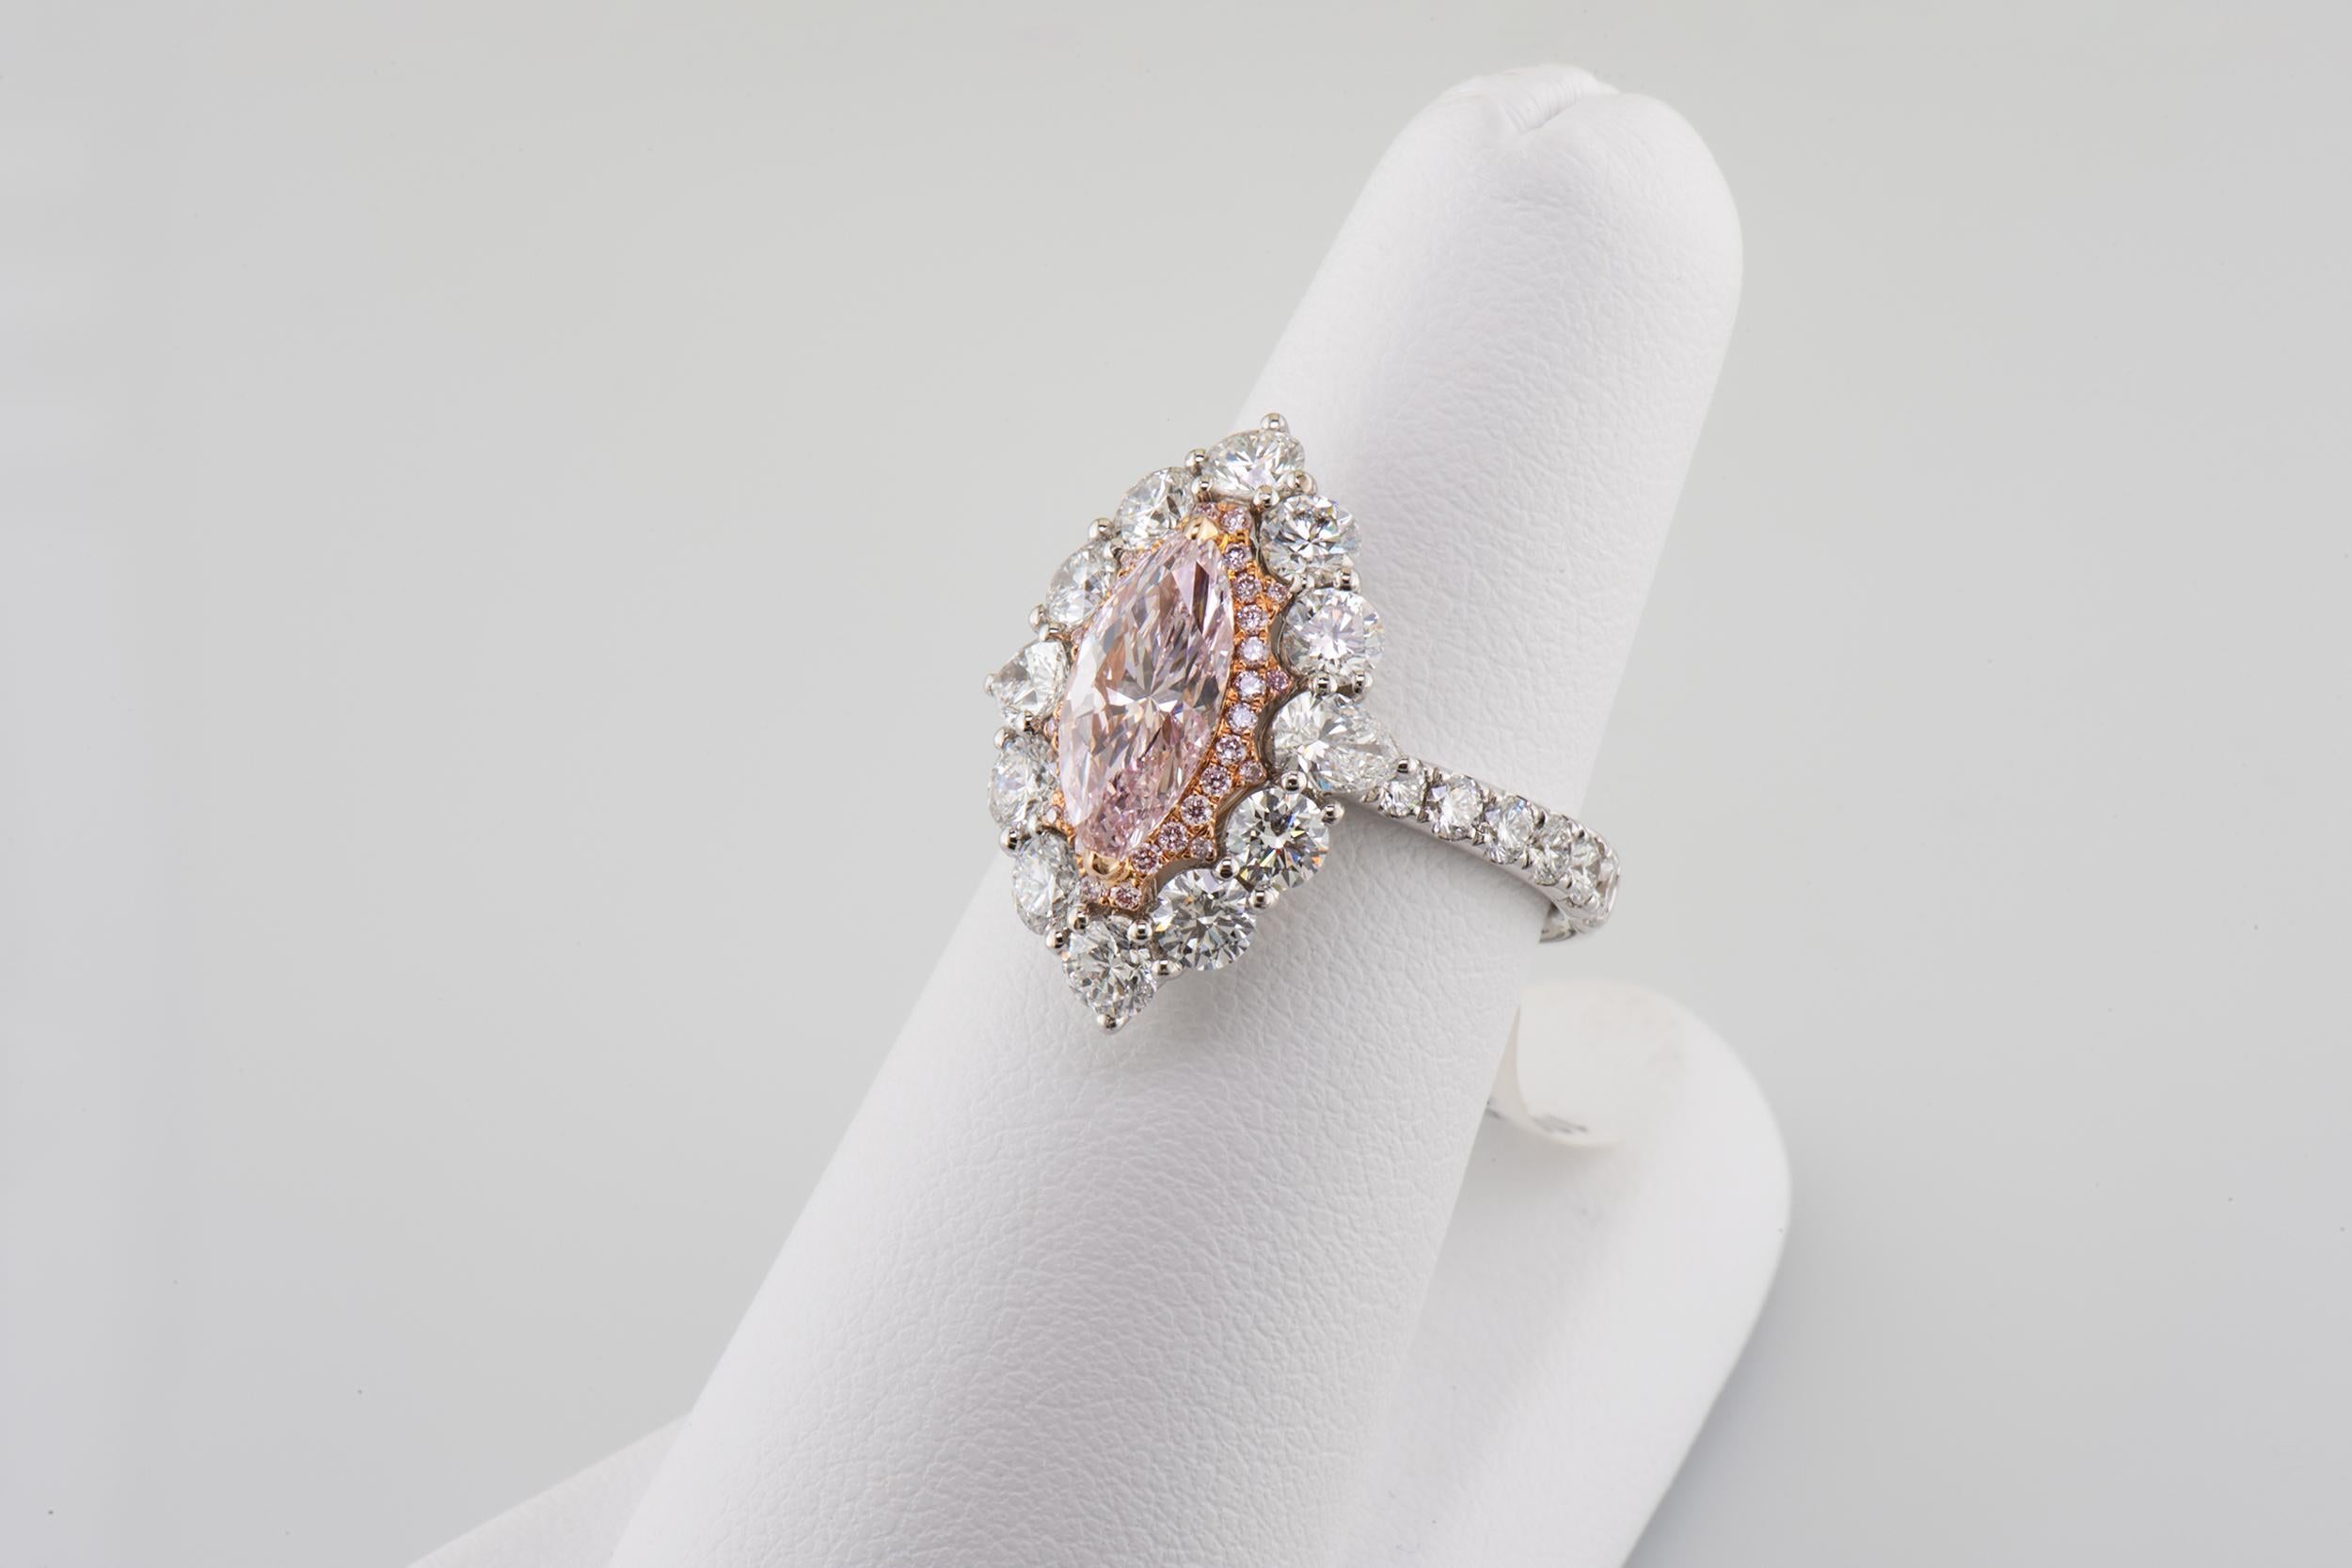 Designed to sparkle for a lifetime, this exquisite natural pink marquis-cut diamond is wrapped in a frame of smaller pink diamonds set in rose gold. Crafted in 18k white gold, the elegant outer halo sets off the bright pink center and sits atop a